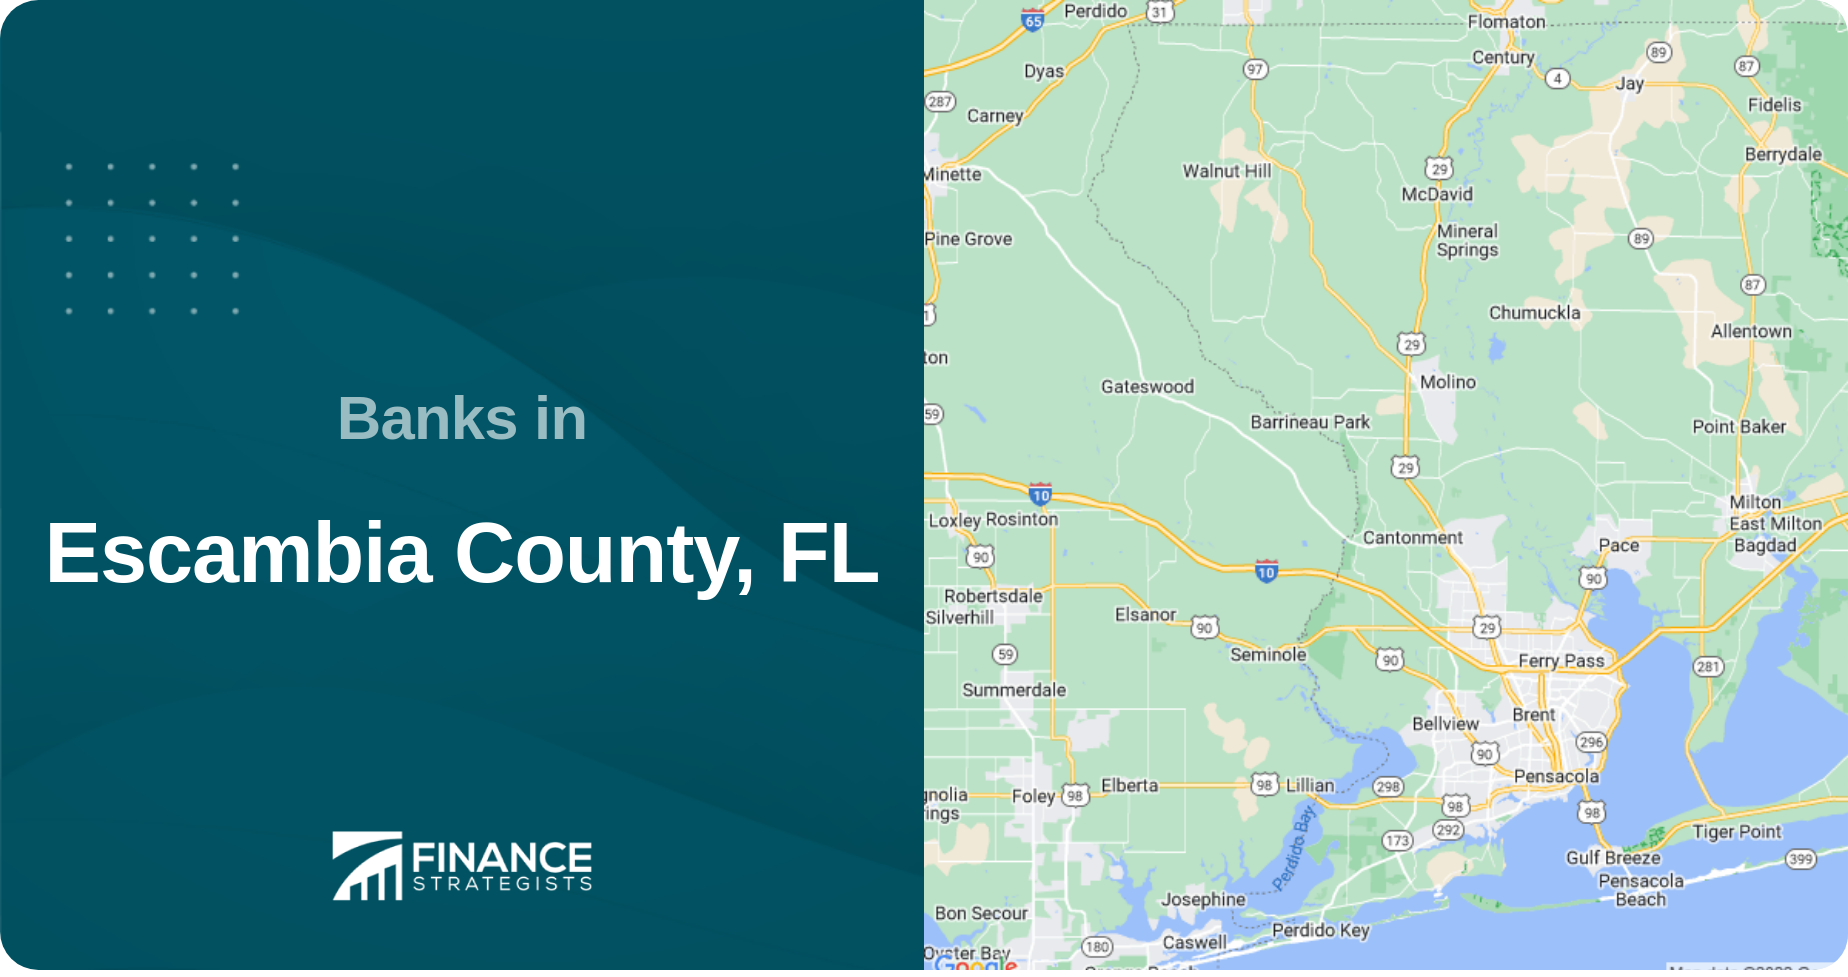 Banks in Escambia County, FL